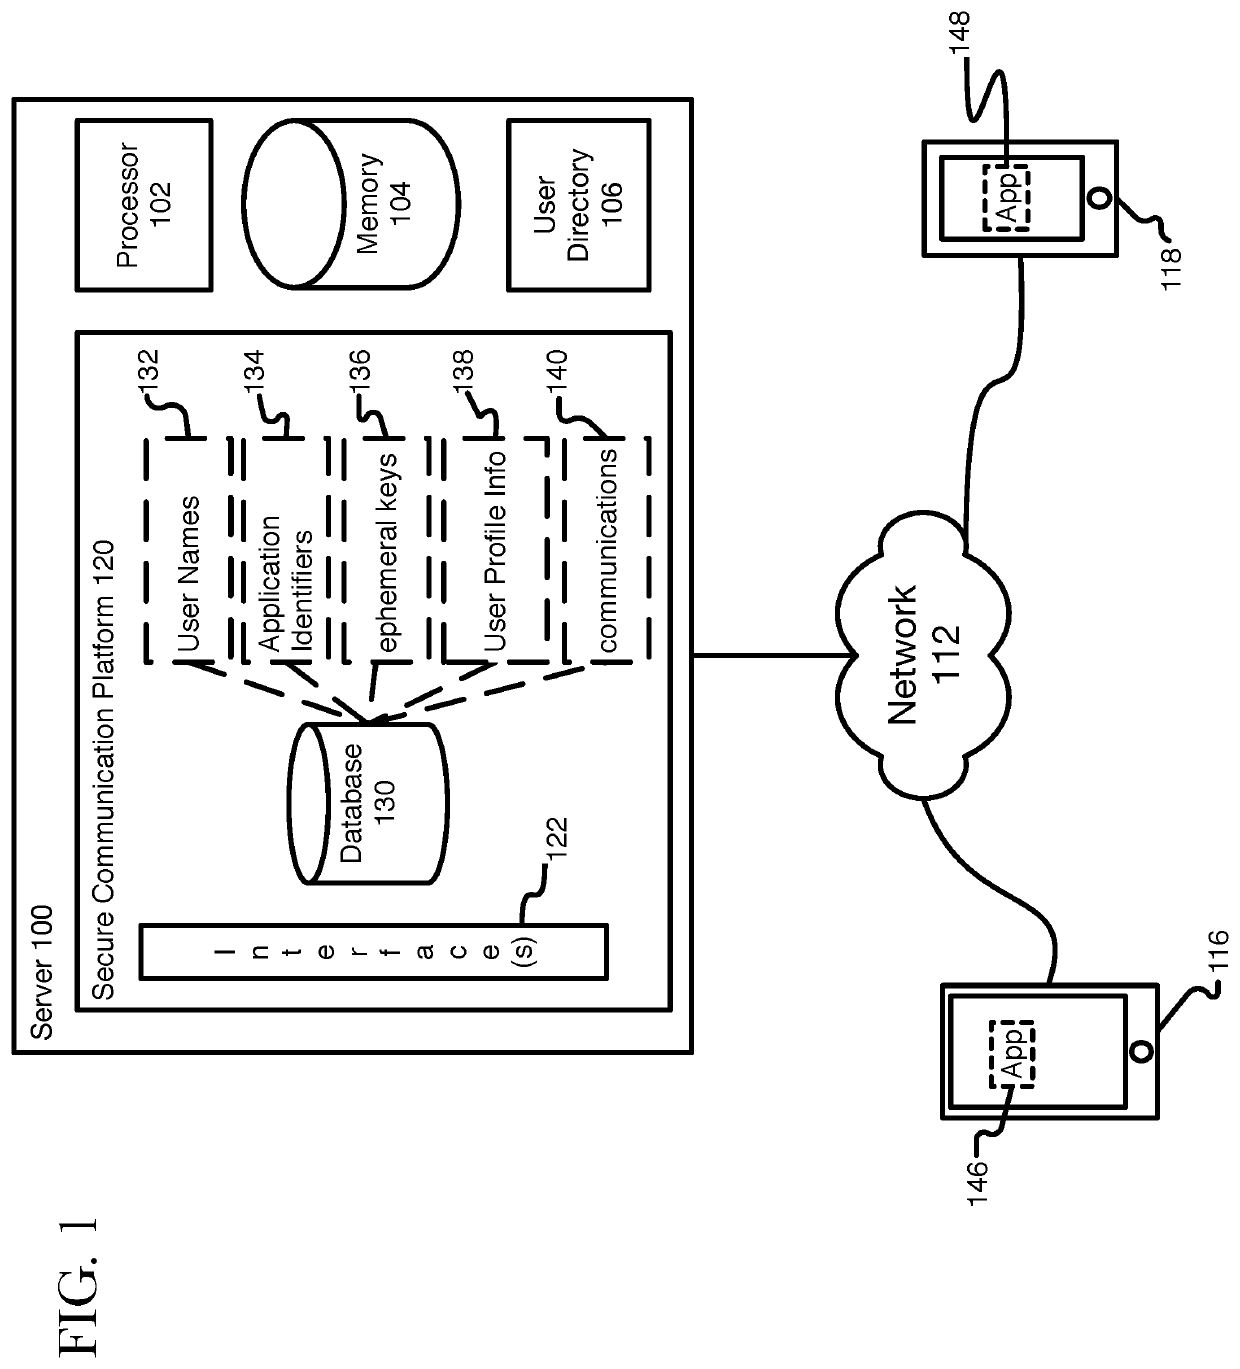 Provisioning ephemeral key pools for sending and receiving secure communications